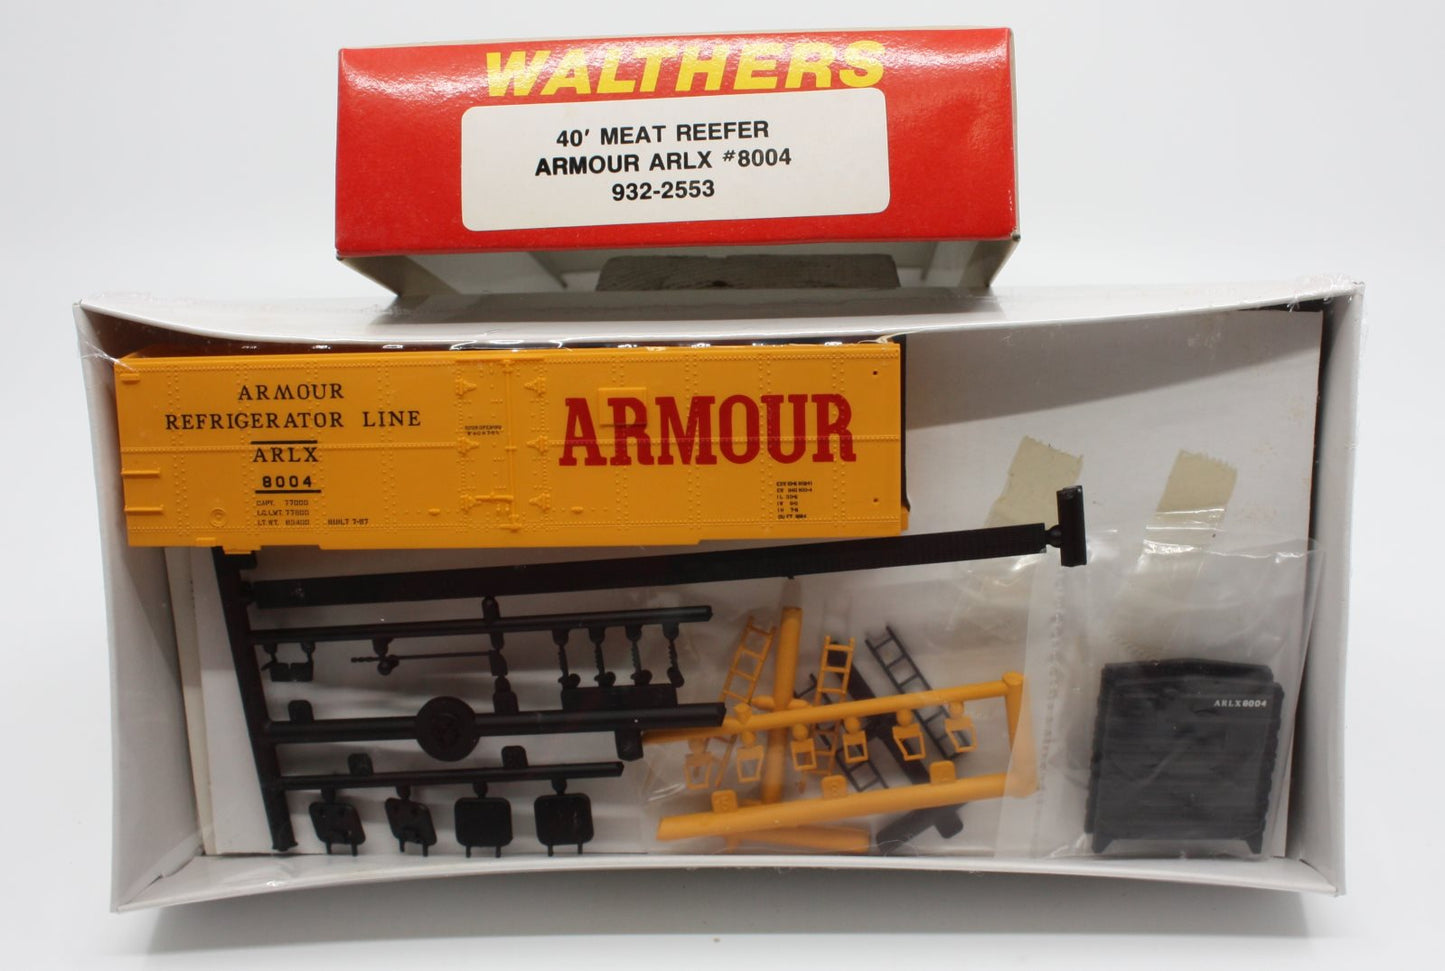 Walthers 932-2553 Armour ARLX 40' Meat Reefer Kit #8004